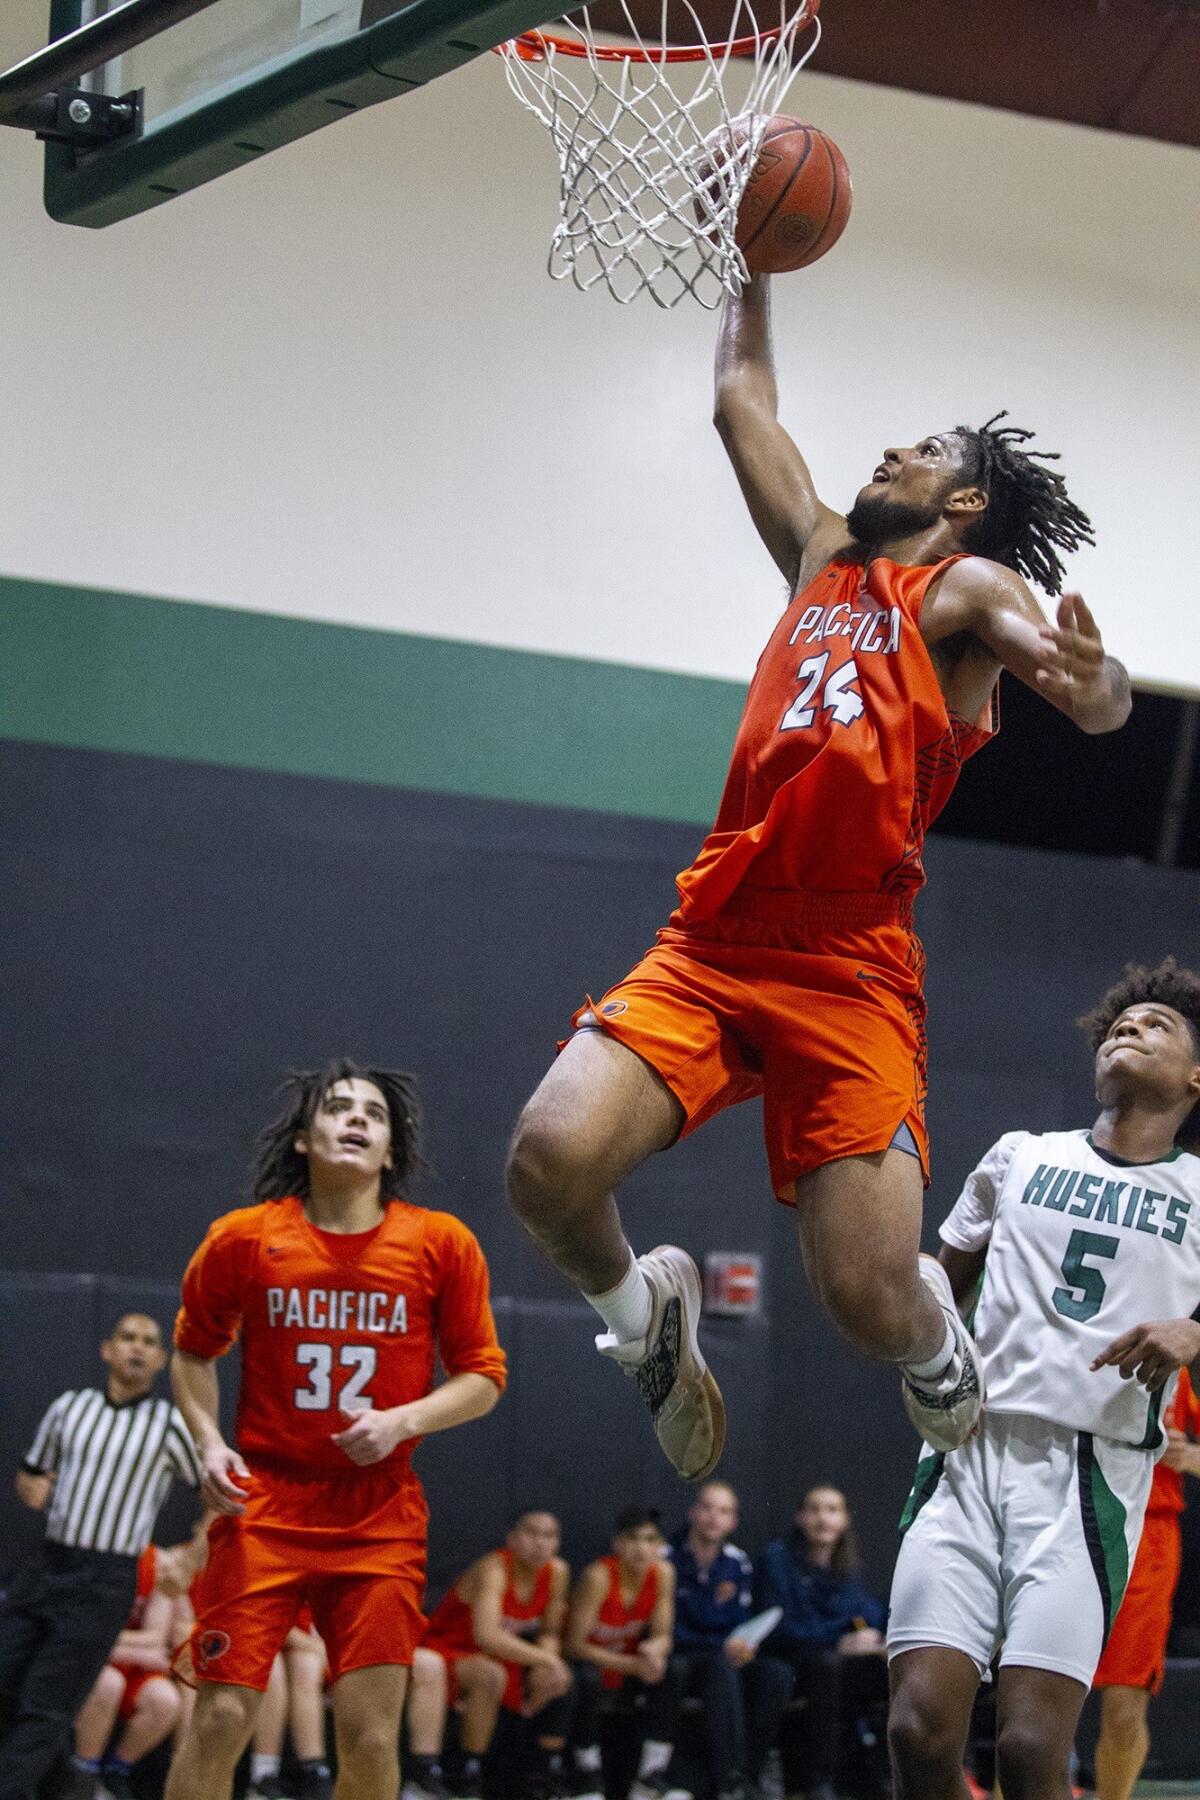 Pacifica Christian Orange County High's Josh Sims goes up for a dunk in a CIF State Southern California Regional Division III quarterfinal playoff game at Fairmont Prep on Thursday.